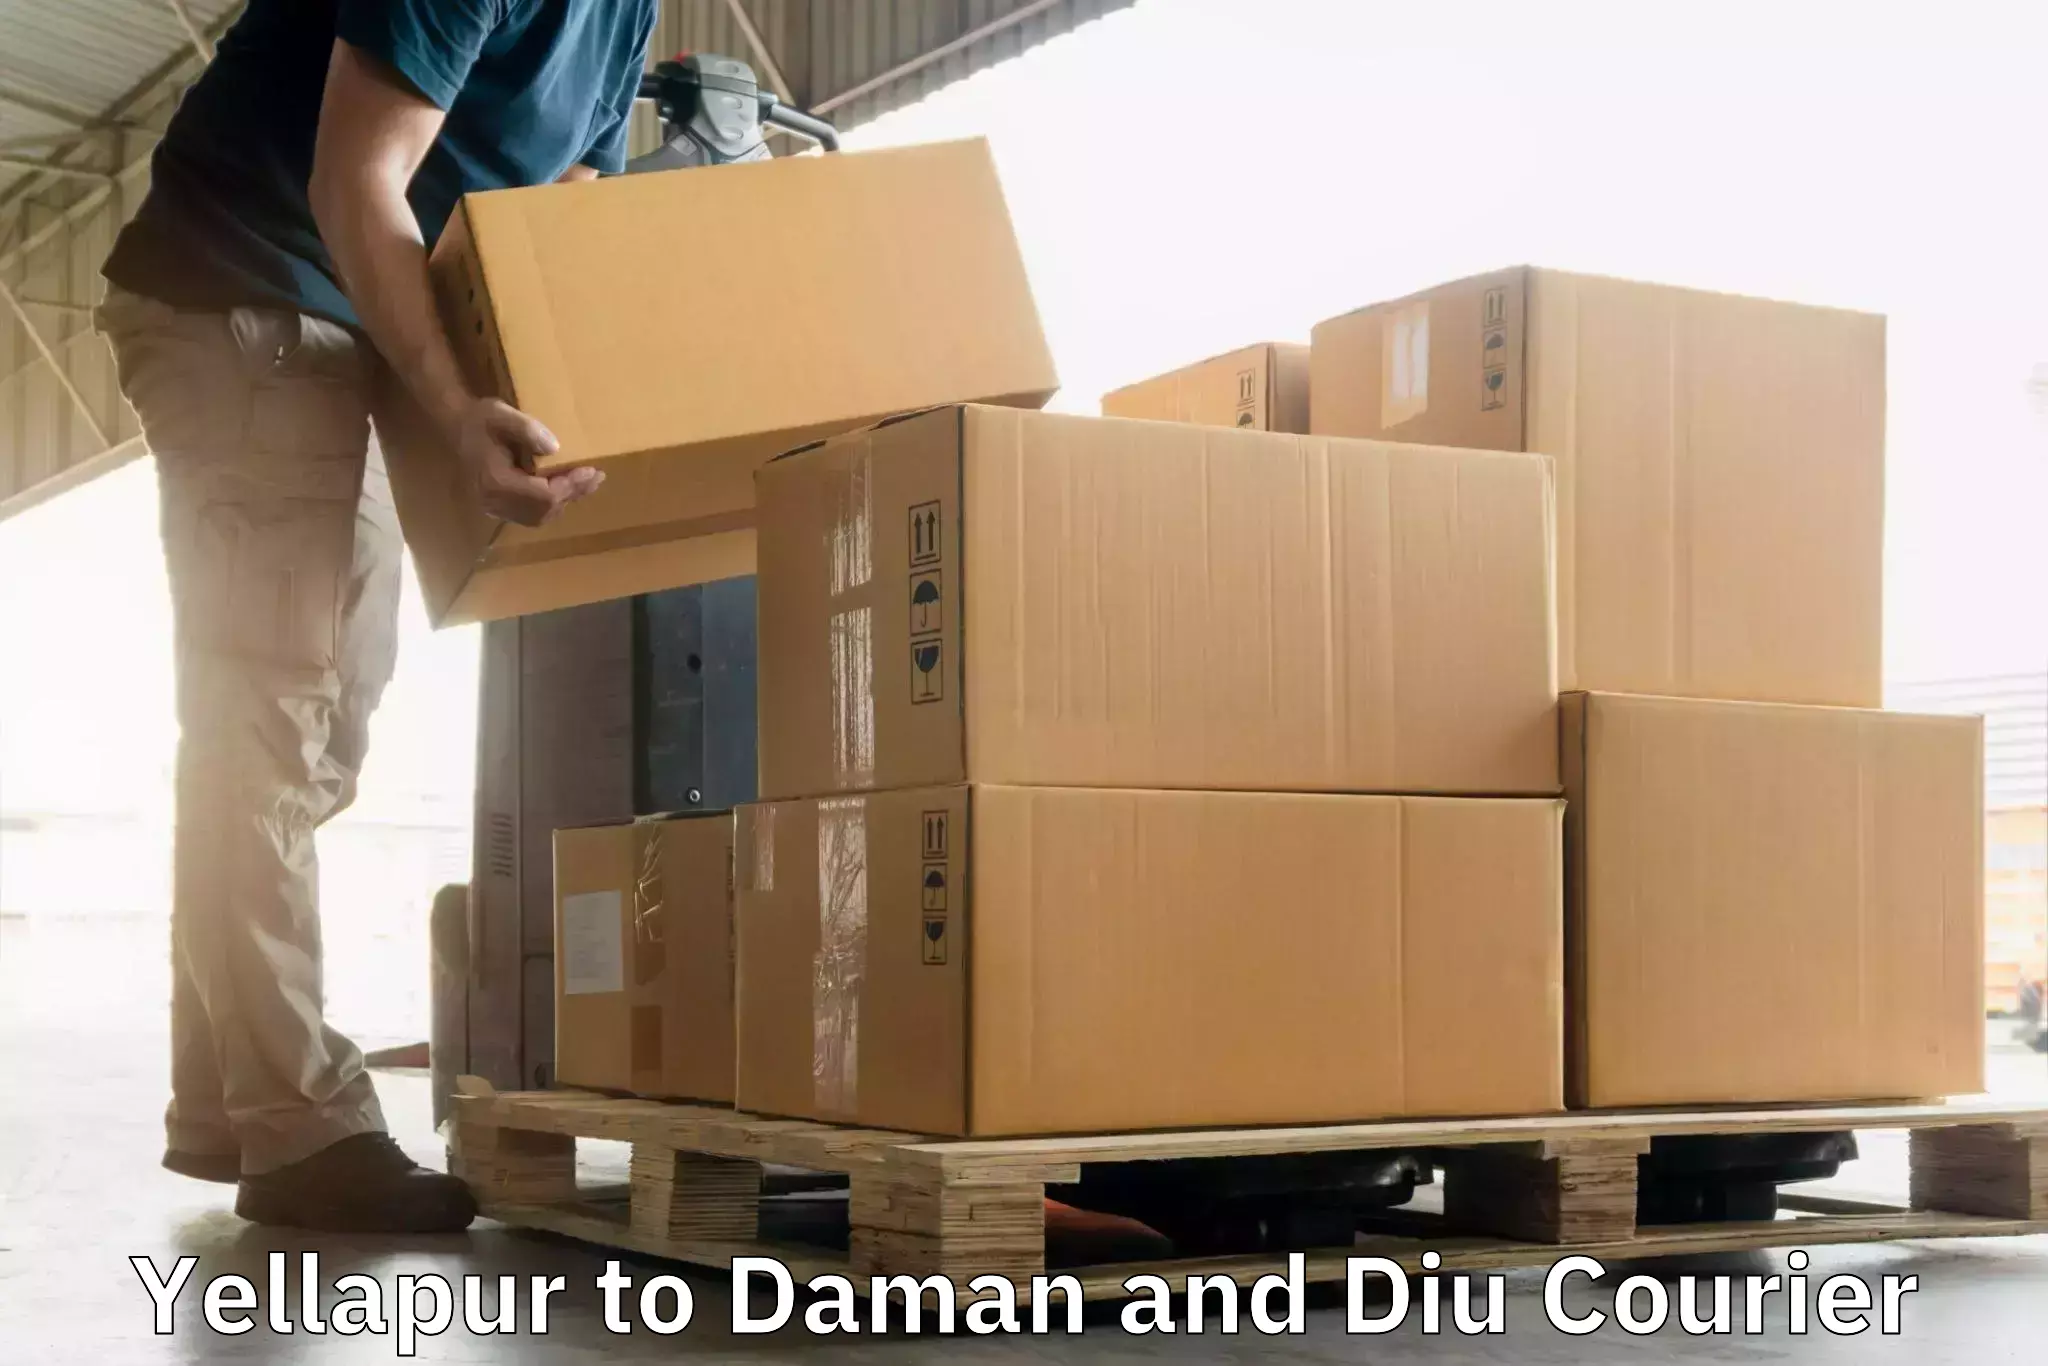 24-hour courier service Yellapur to Daman and Diu